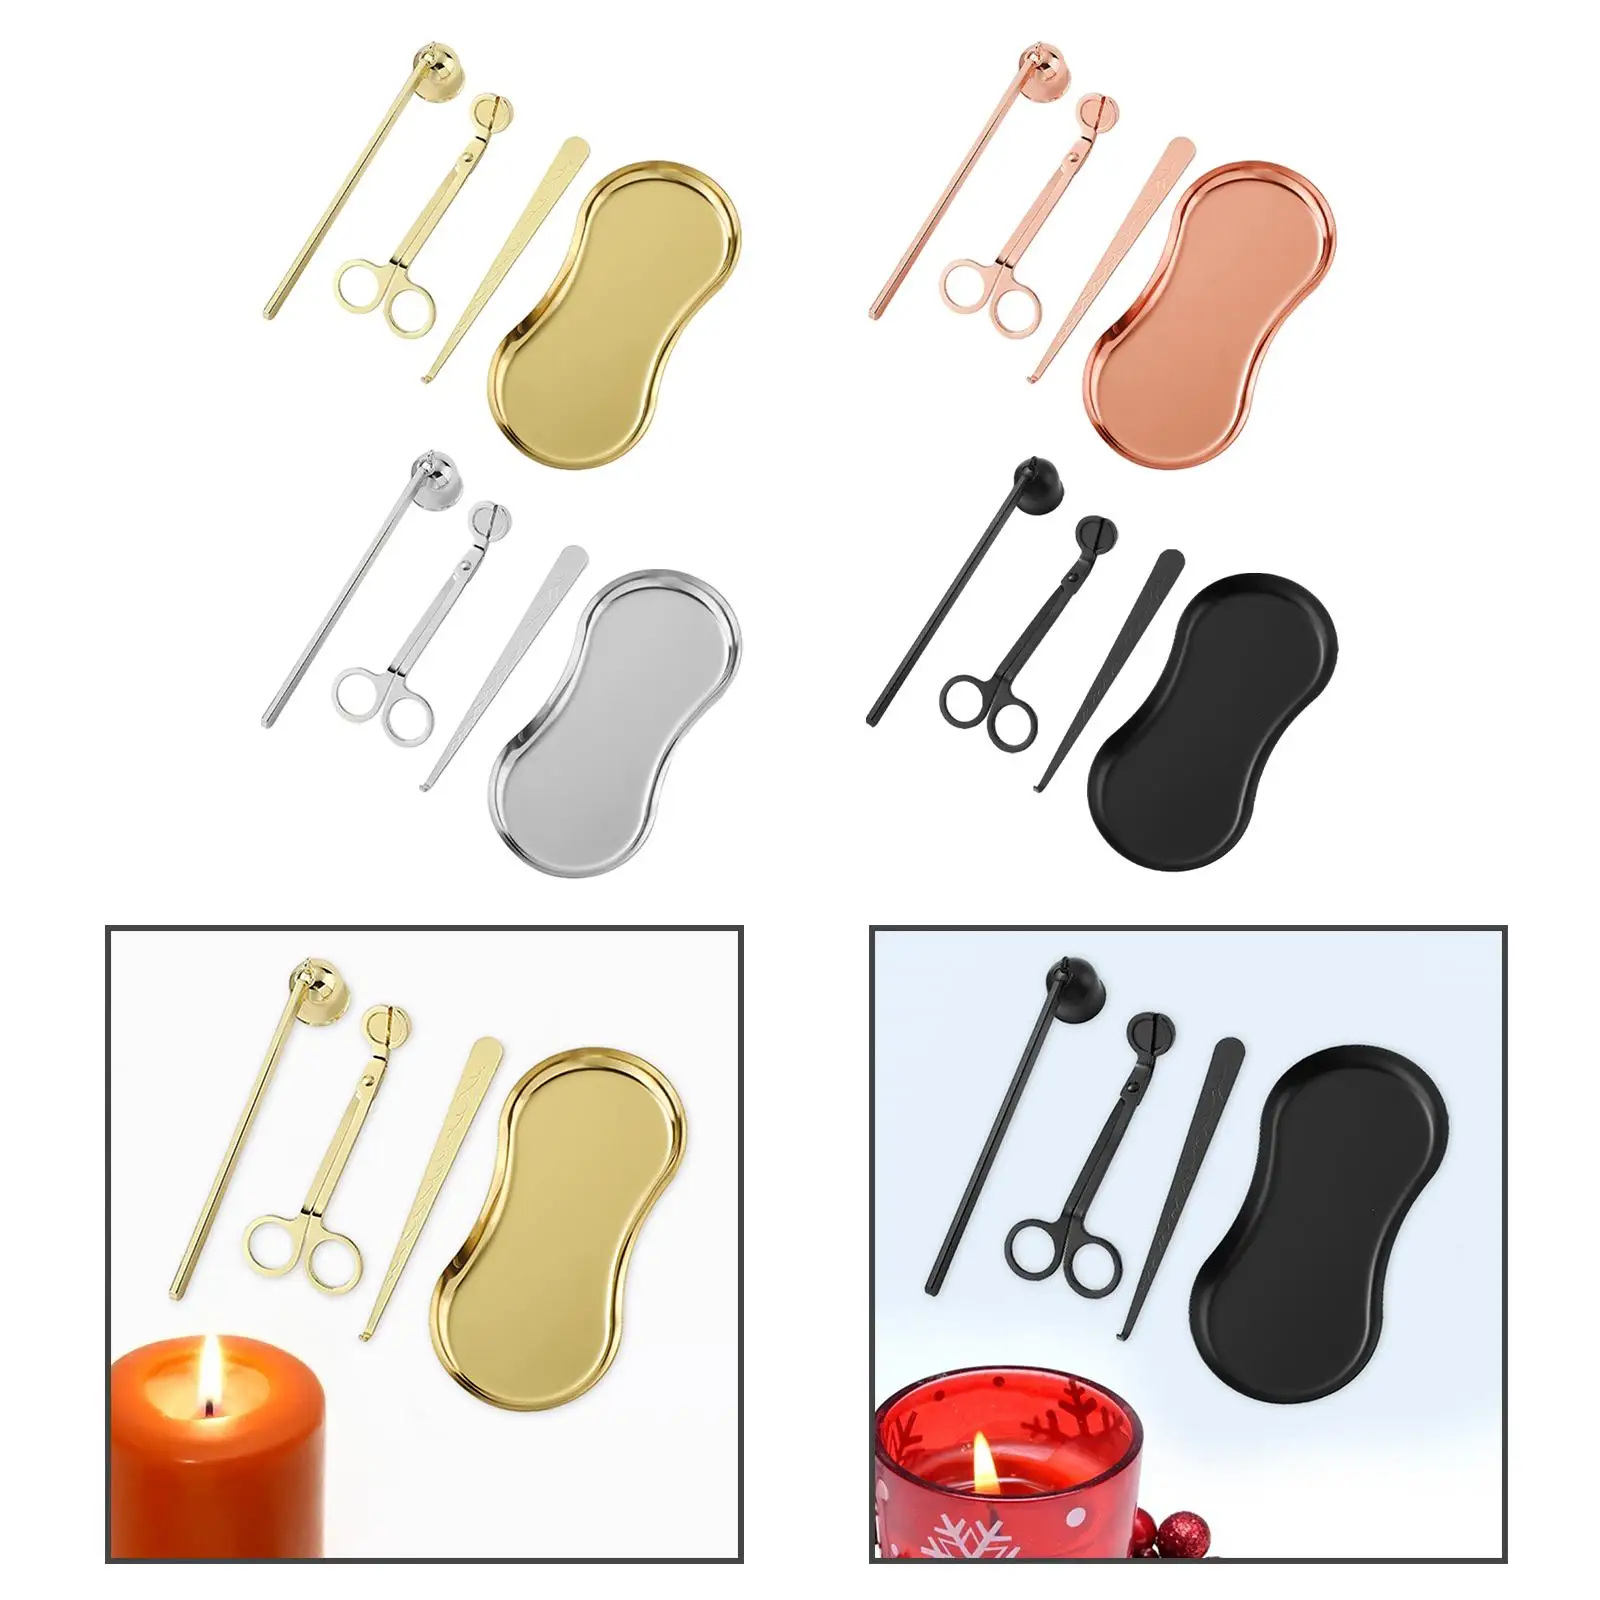 4Pcs Candle Accessory Wick Cutter Snuffer Kit Wick Dipper Durable Rust Proof